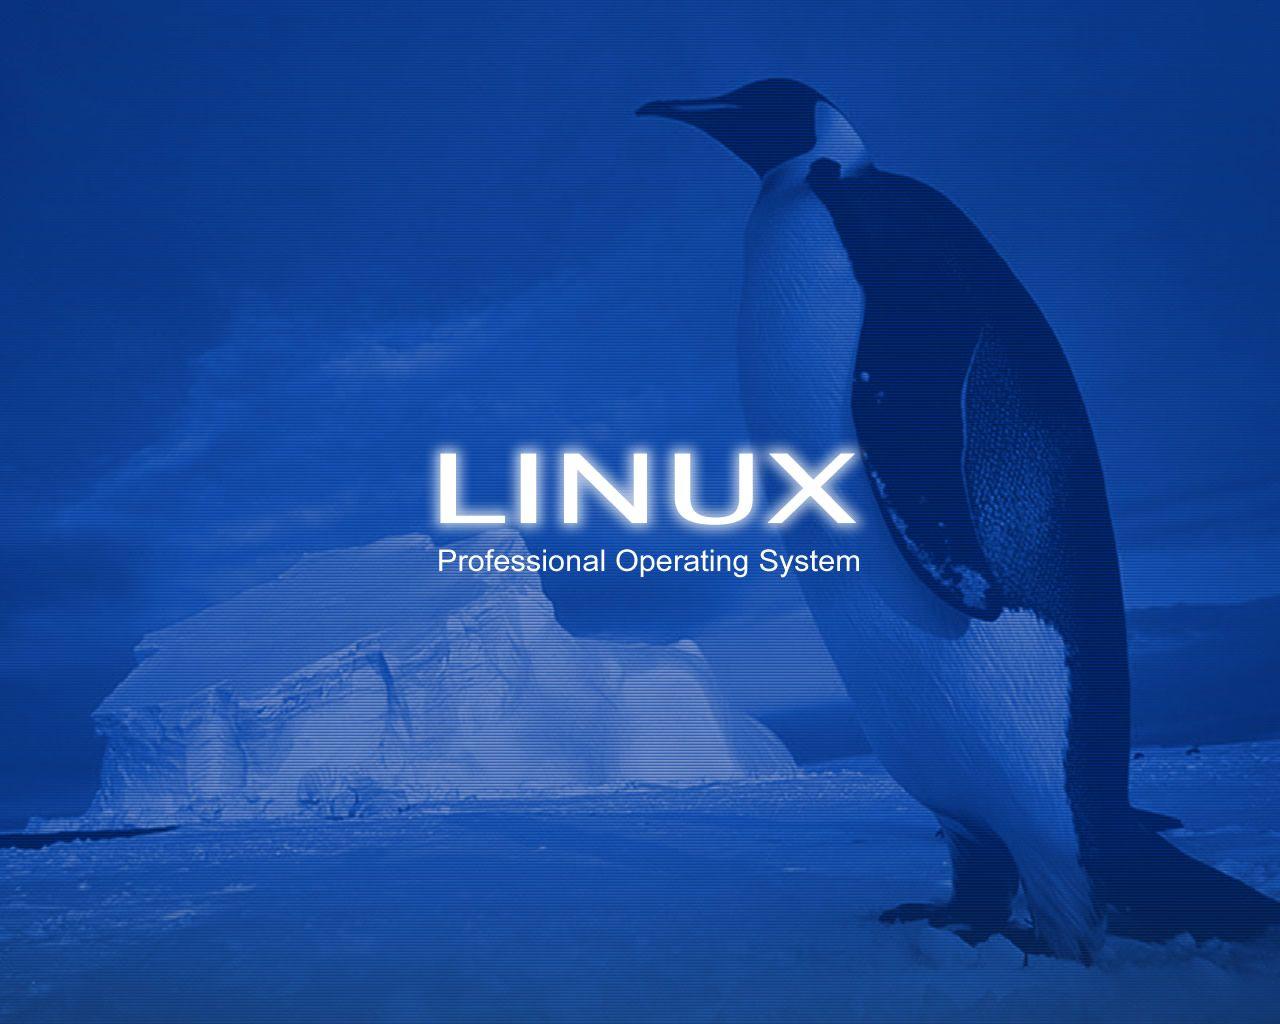 Download Best Linux Pro Professional Operating System Wallpaper